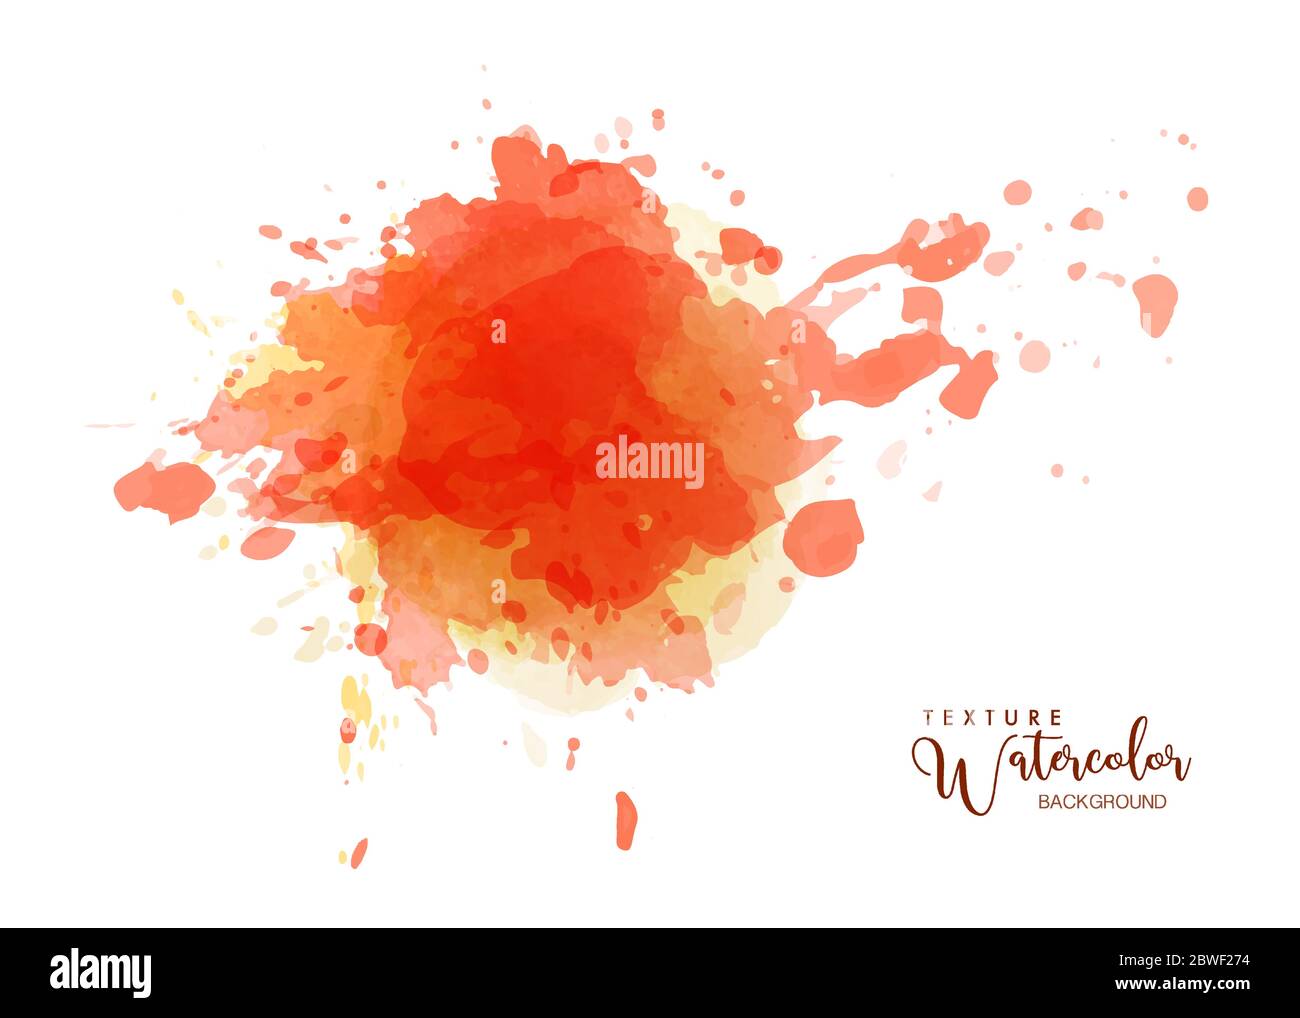 Abstract isolated orange bright watercolor drops splash. Grunge texture artistic vector used as being an element in the decorative design of invitatio Stock Vector